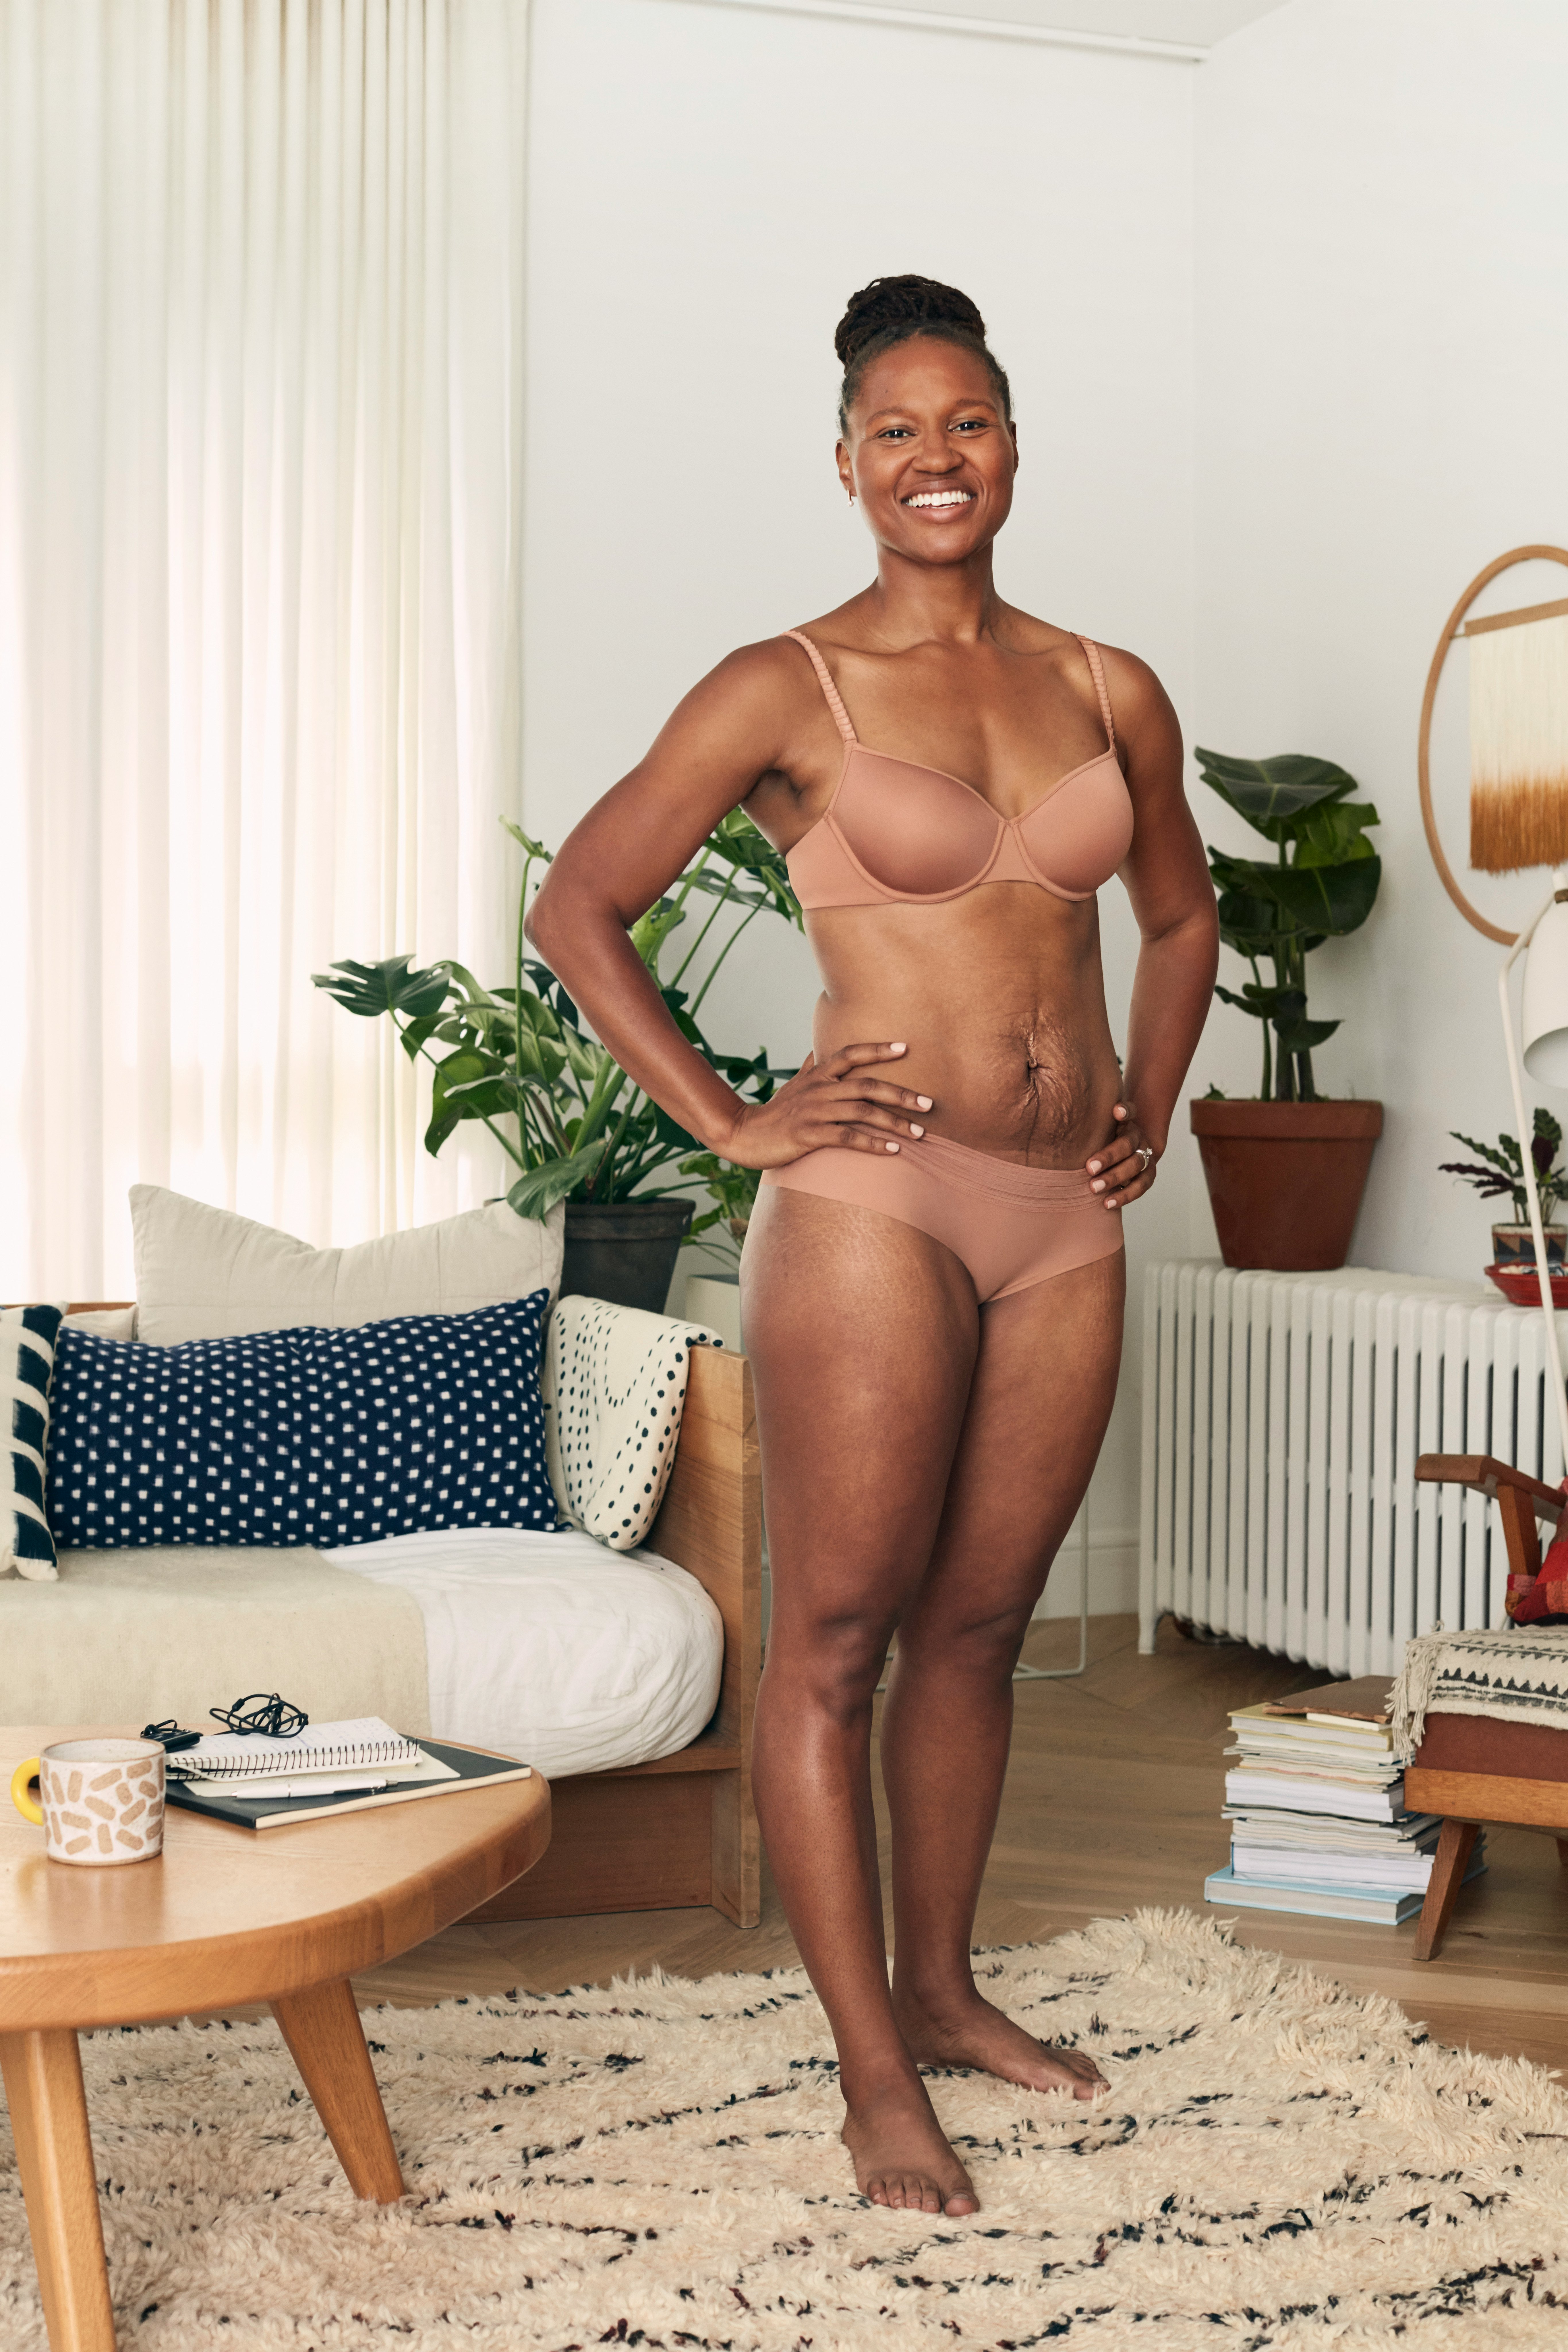 ISpy! New lingerie brand Intimately kickstarts an inclusion